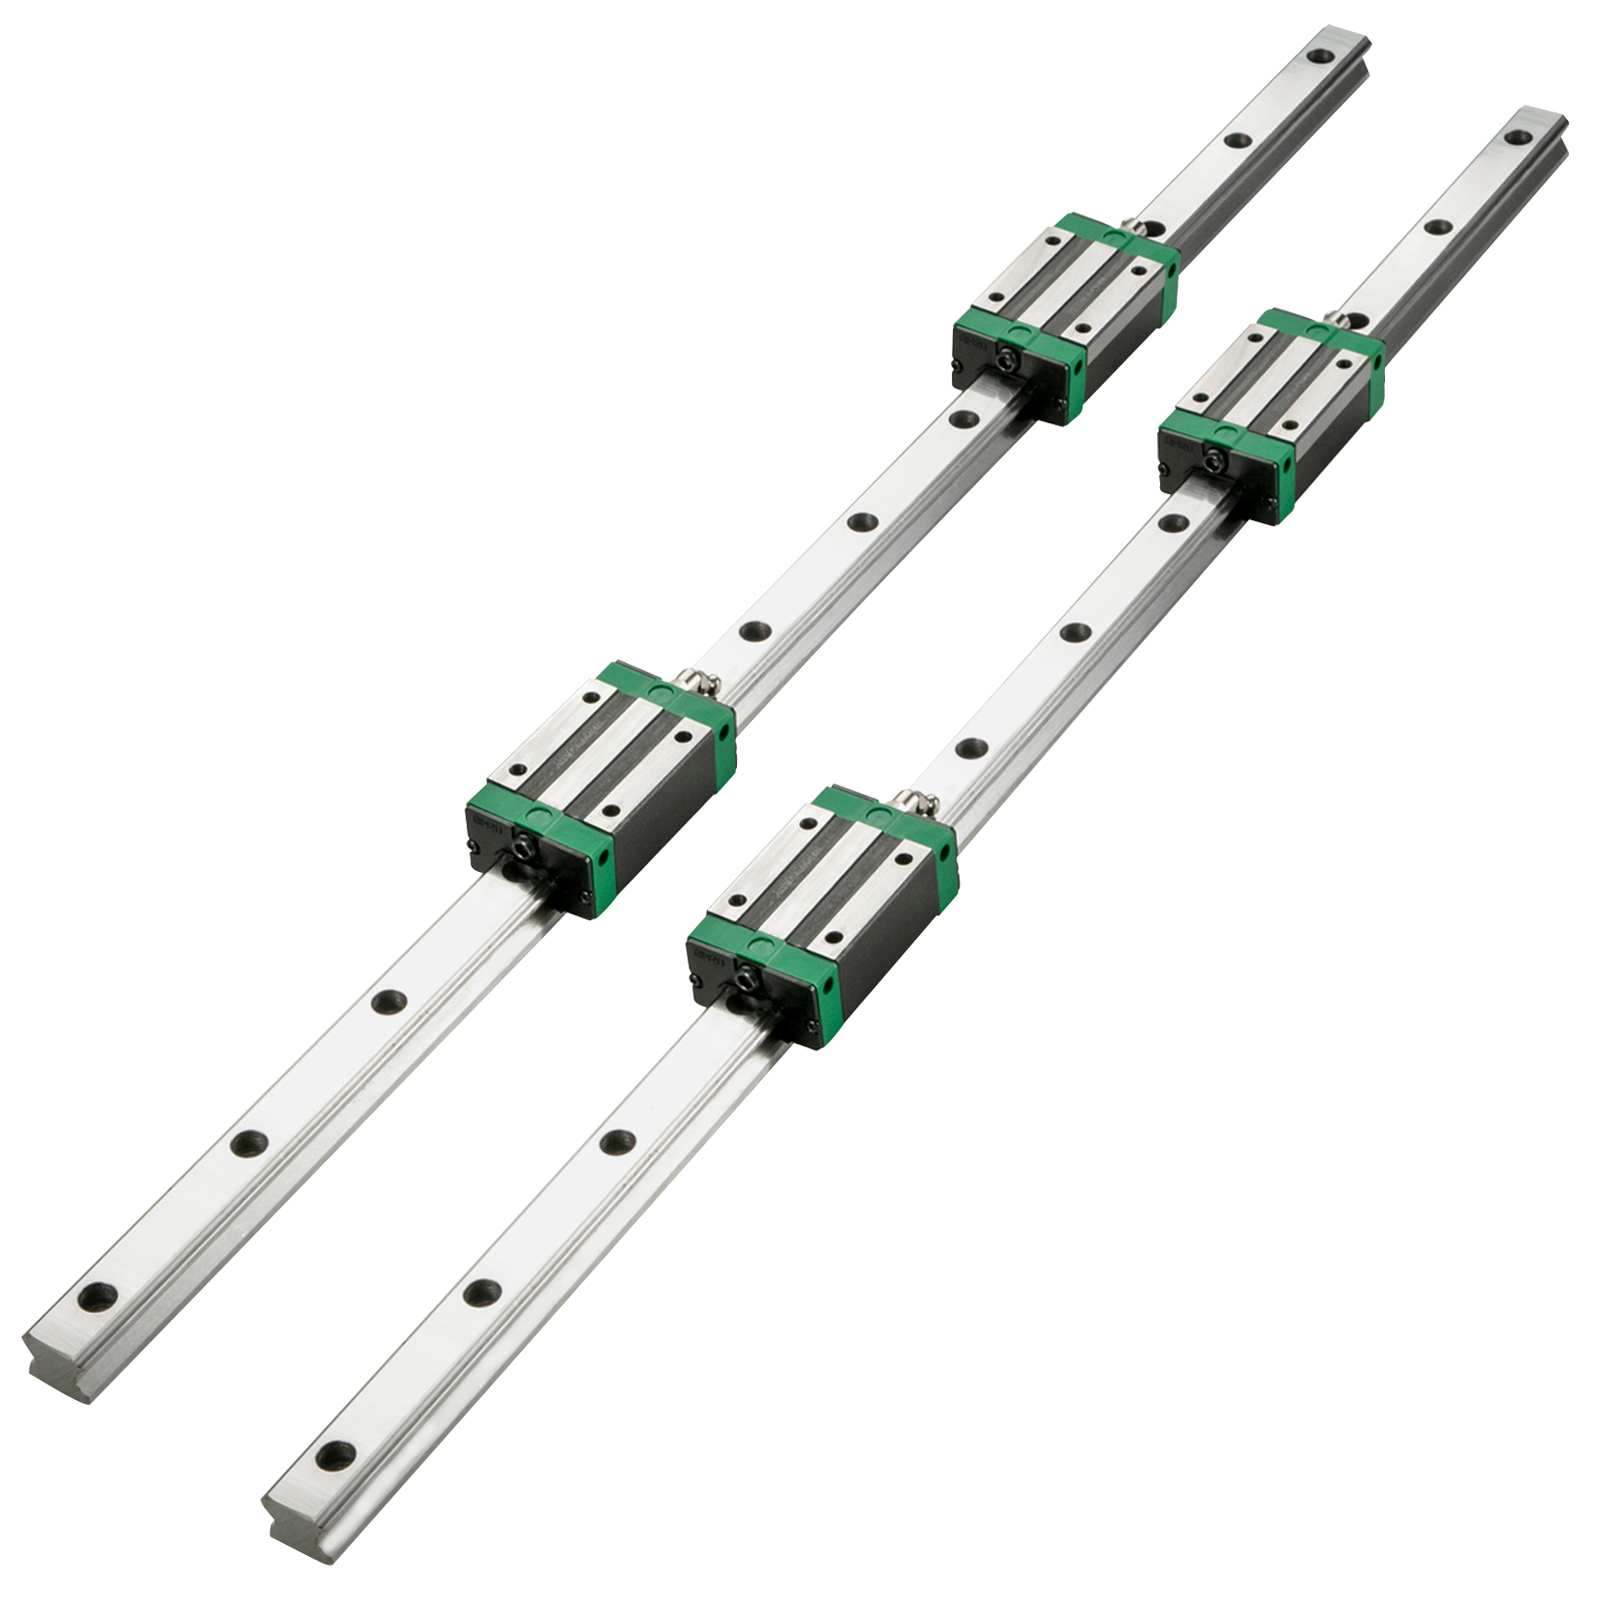 HGR20-500mm Linear Guide Rail and 2pcs Carriages Bearing Block Slider 